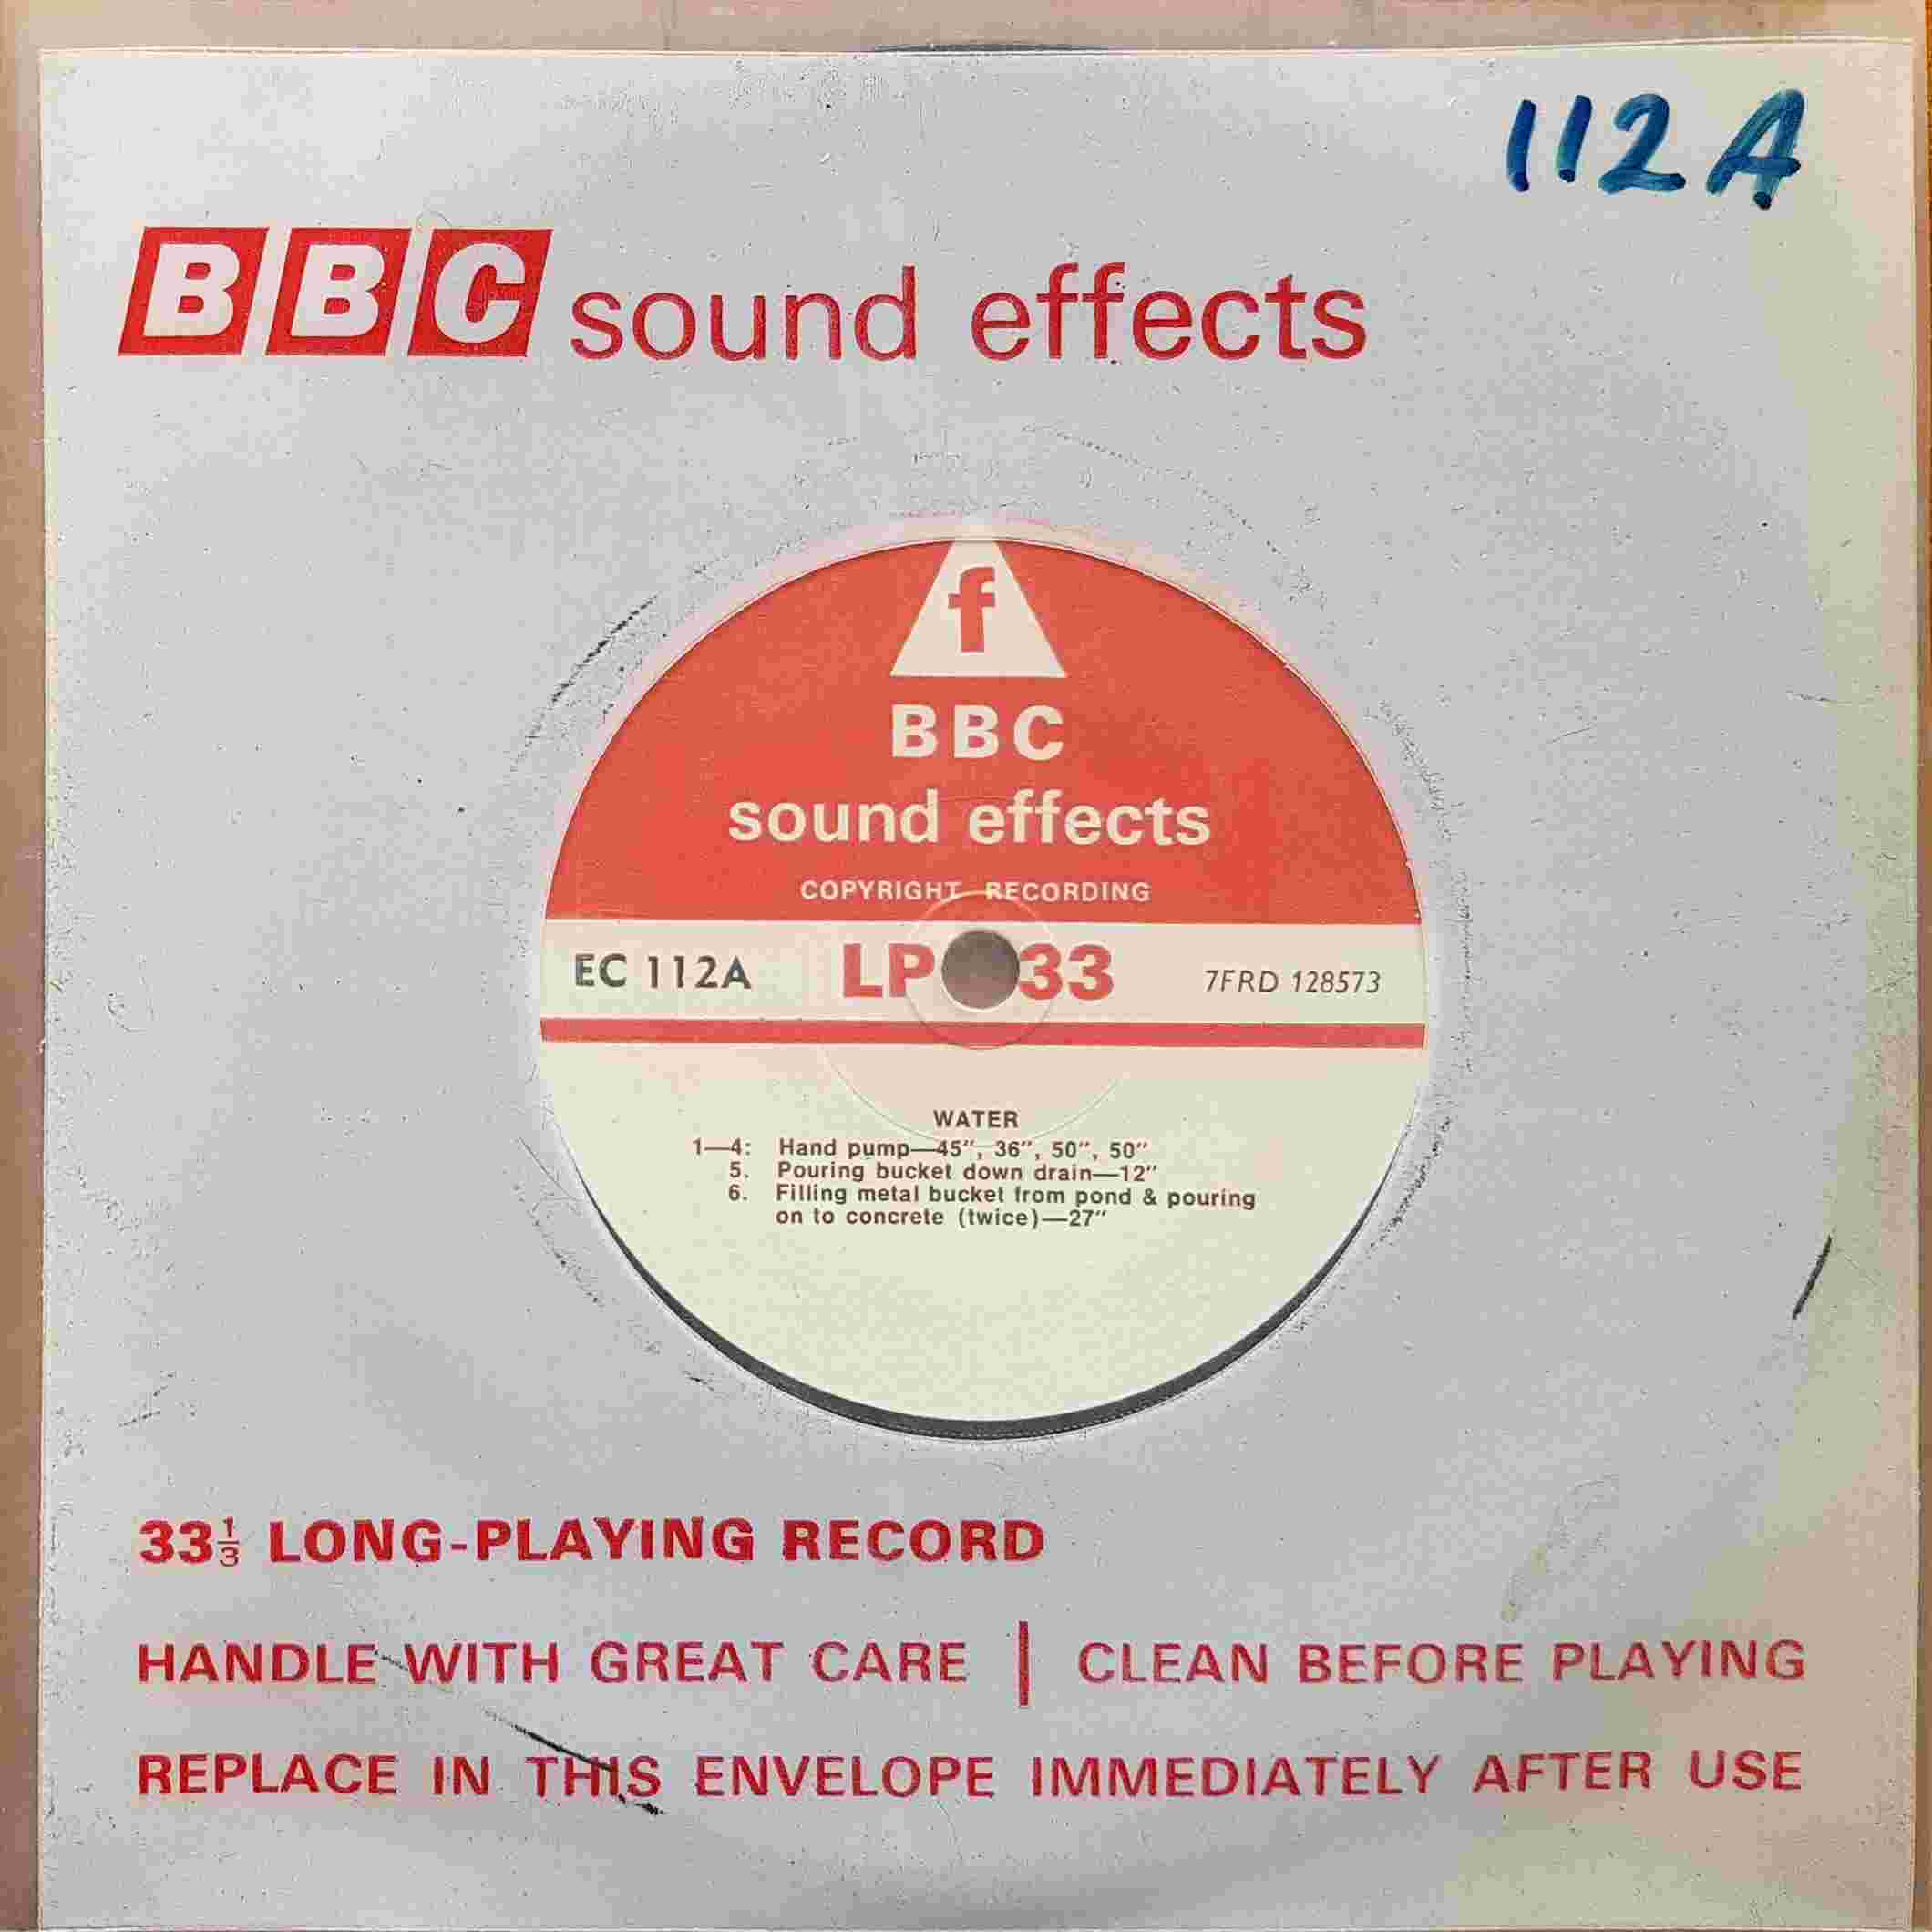 Picture of EC 112A Water by artist Not registered from the BBC records and Tapes library